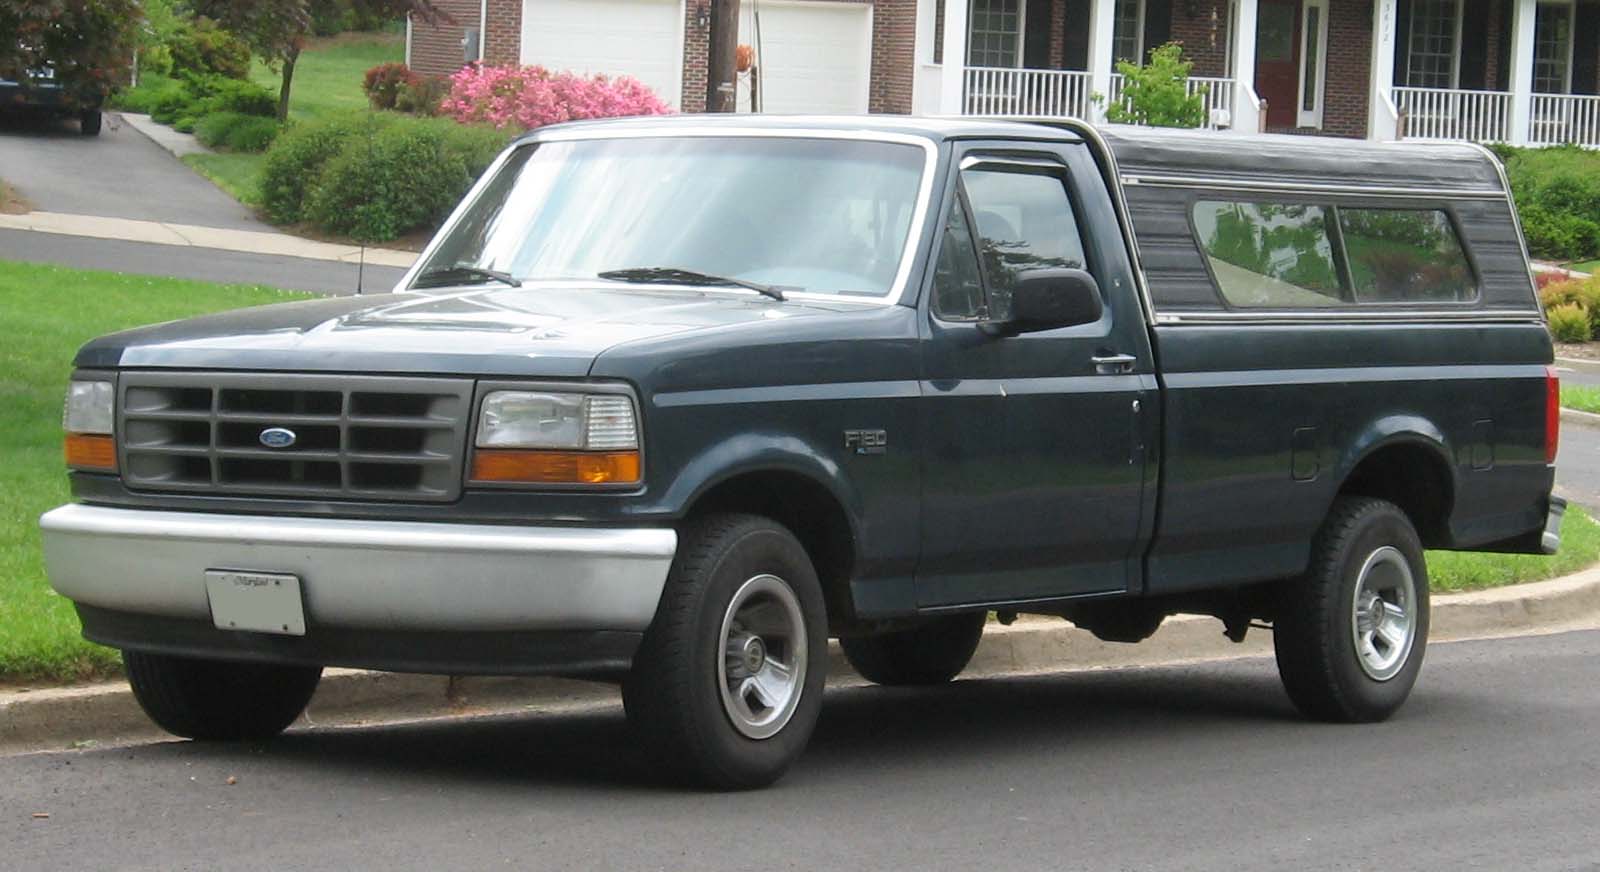 1992 Ford ranger truck bed size